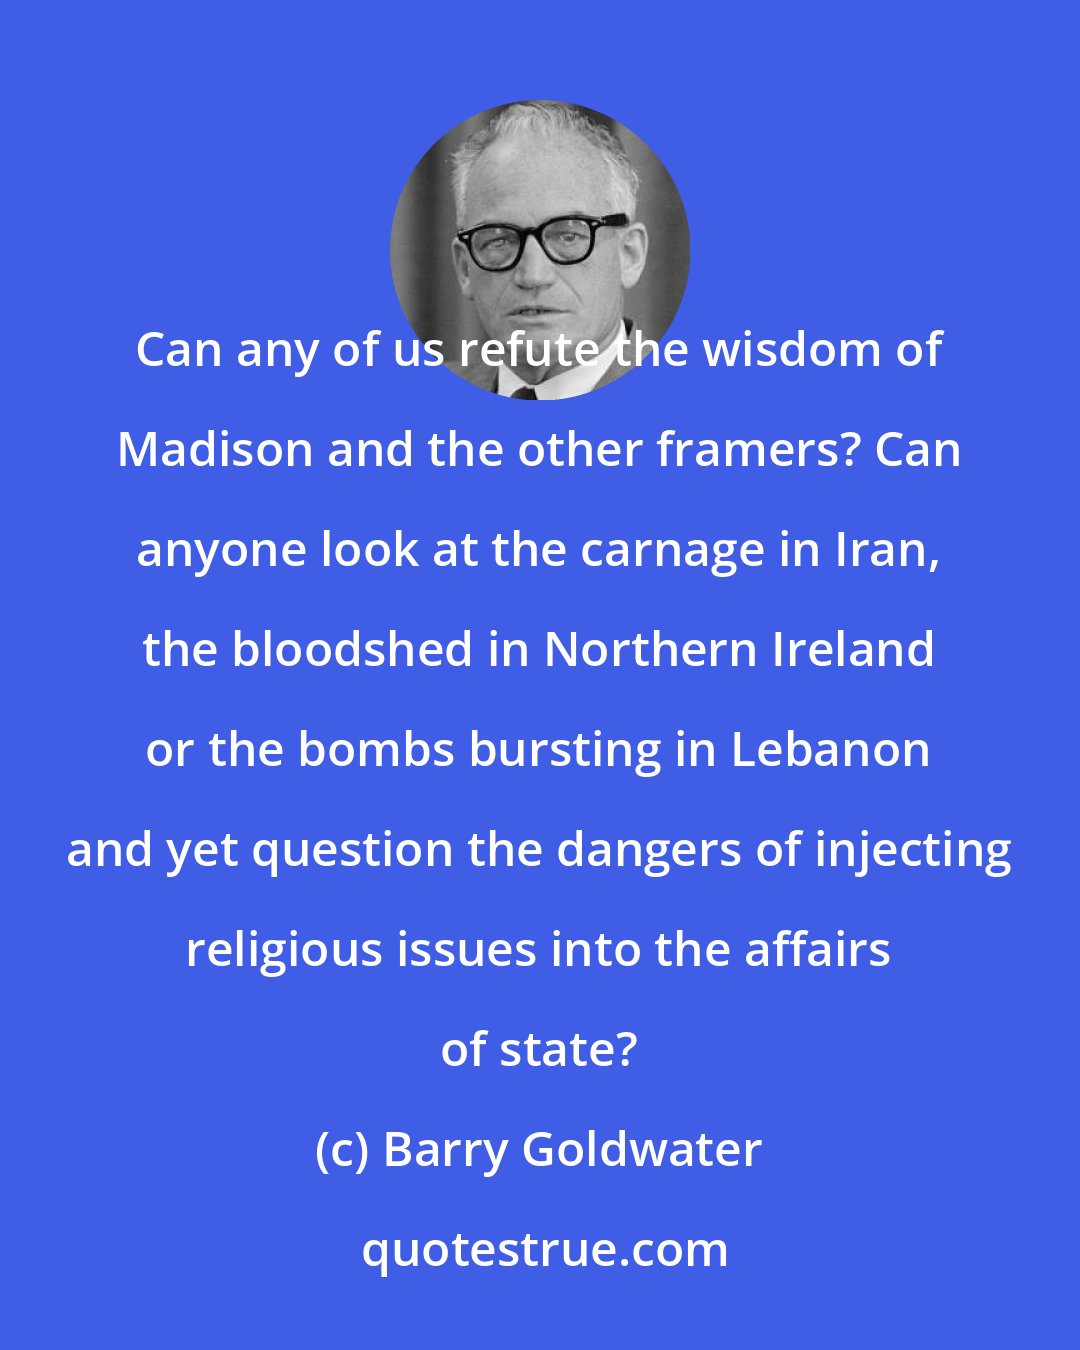 Barry Goldwater: Can any of us refute the wisdom of Madison and the other framers? Can anyone look at the carnage in Iran, the bloodshed in Northern Ireland or the bombs bursting in Lebanon and yet question the dangers of injecting religious issues into the affairs of state?